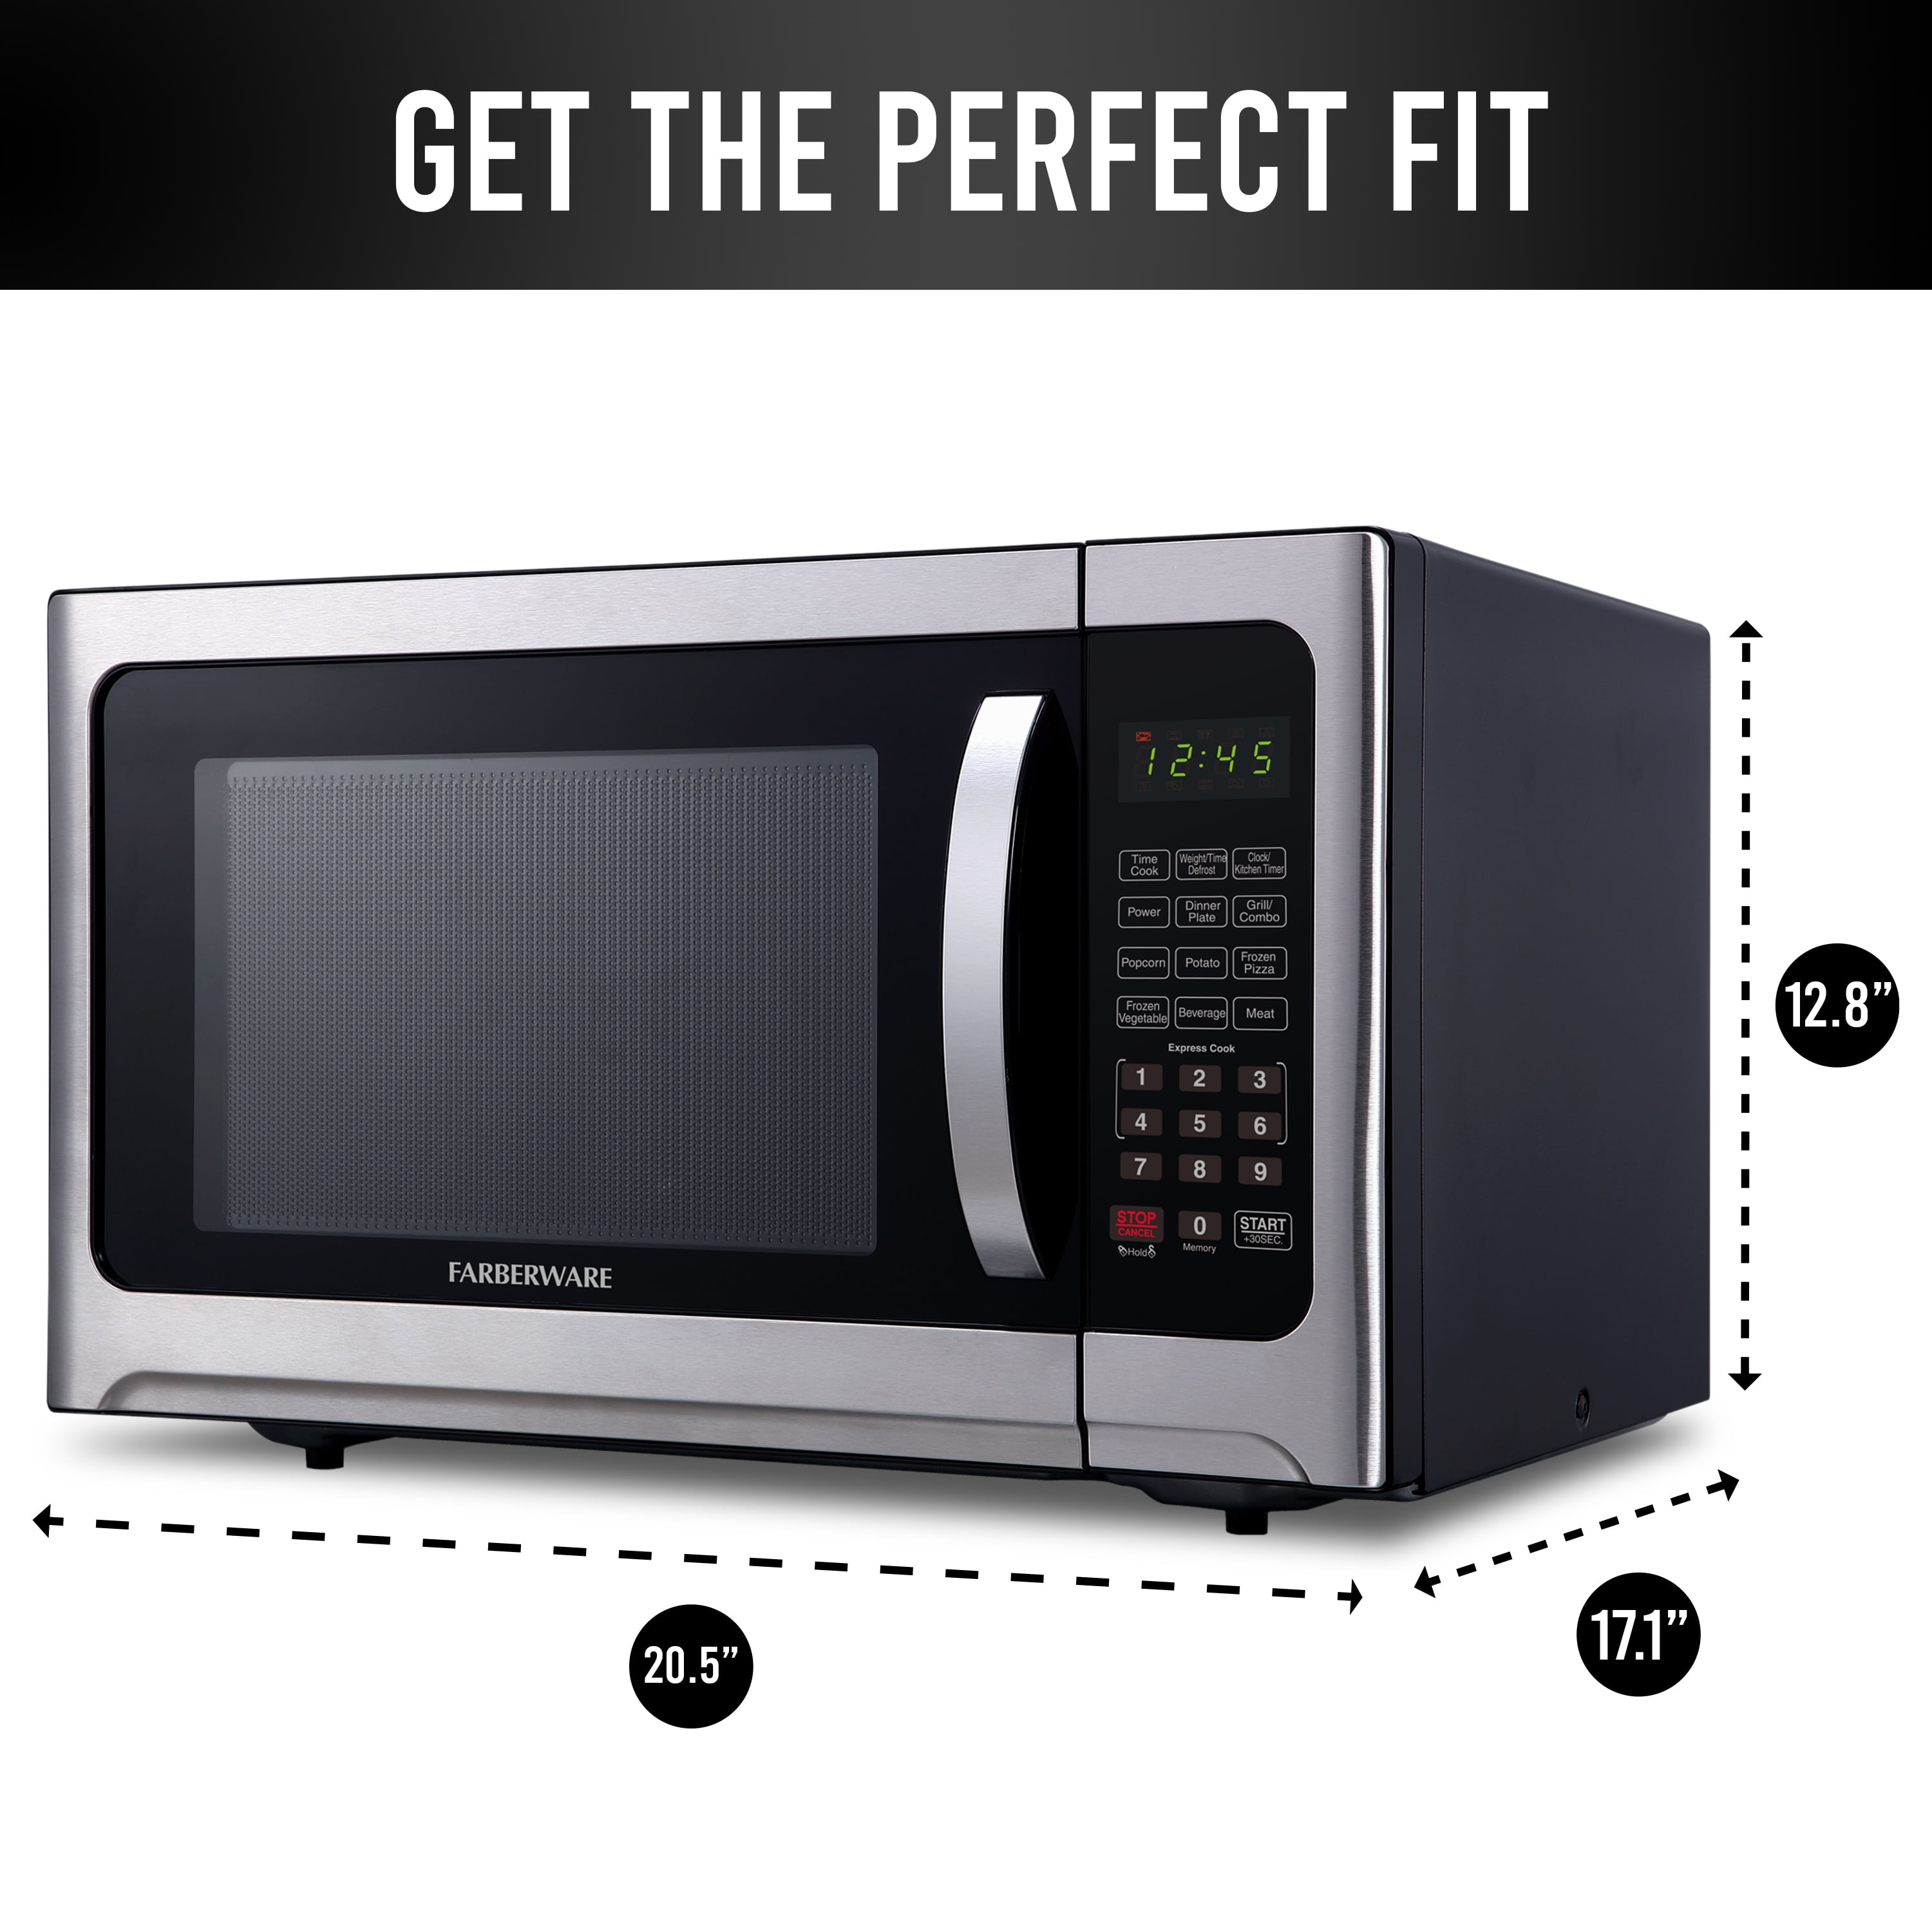 Farberware Professional 1.2 Cu.Ft. Microwave and Grill Oven, Watt, Stainless -